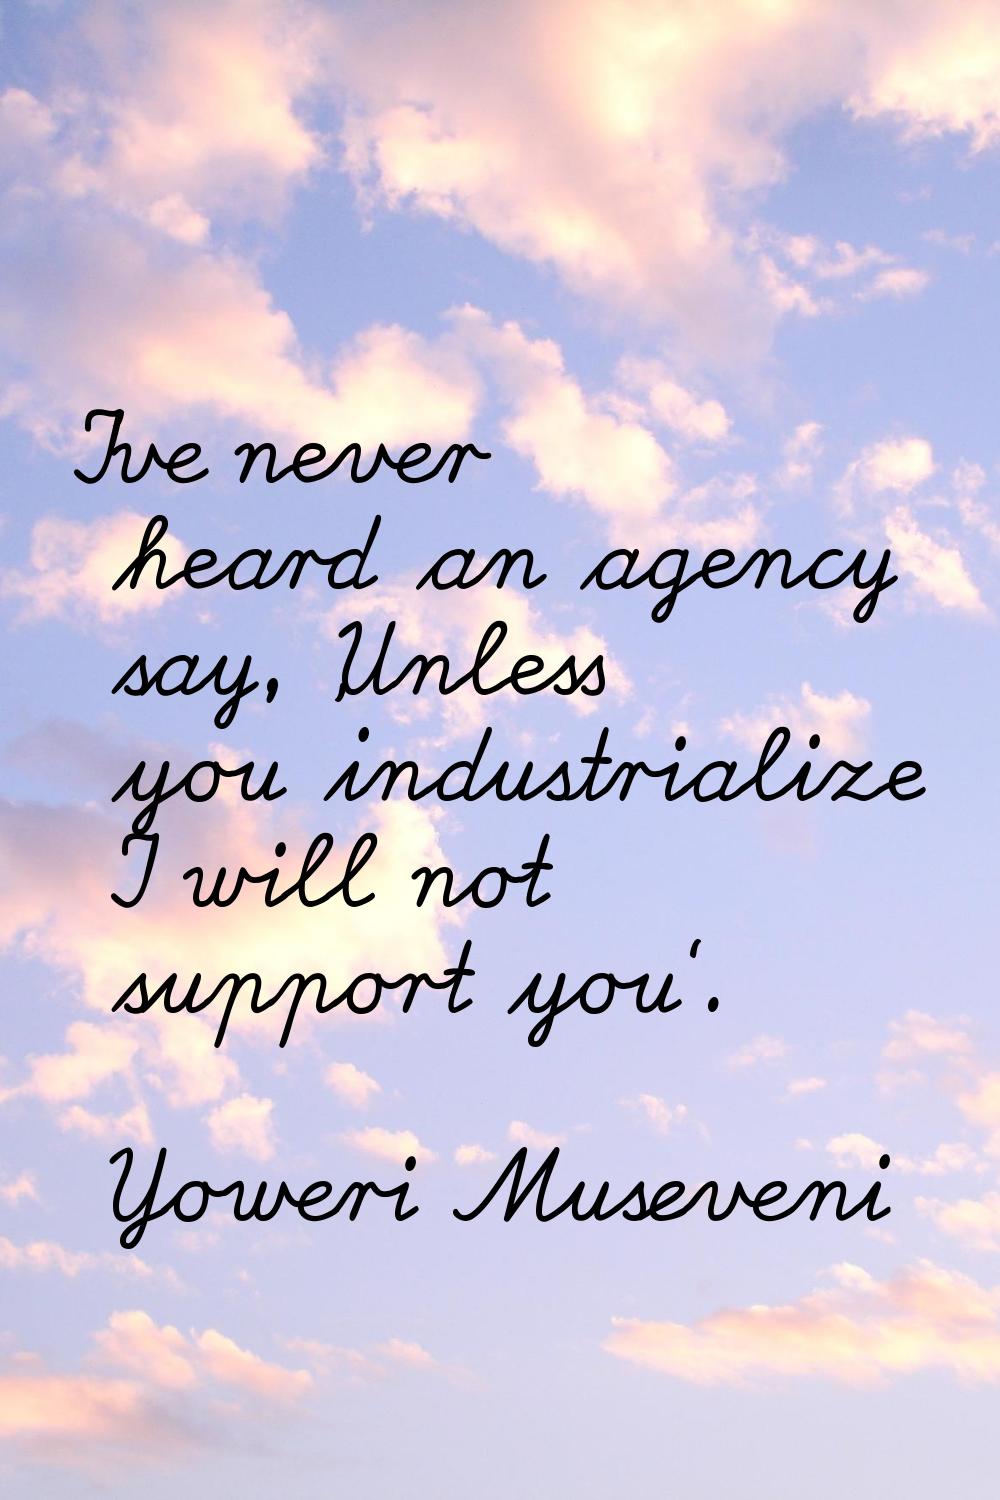 I've never heard an agency say, 'Unless you industrialize I will not support you'.